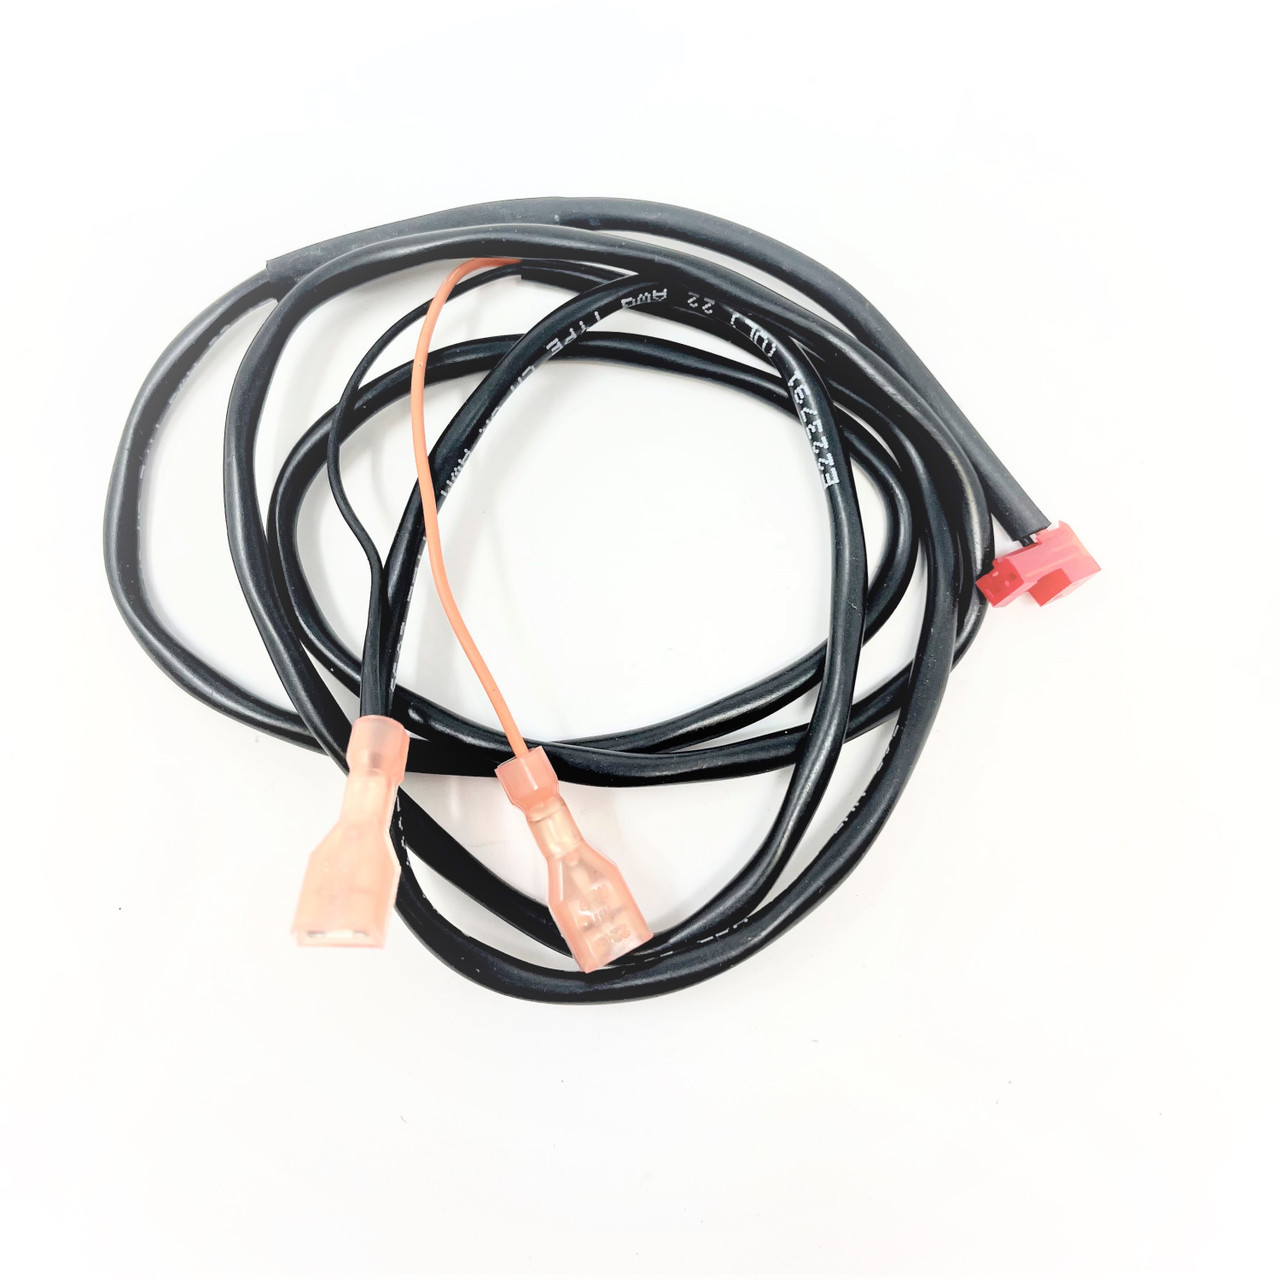 Treadmill 40" Right Pulse Wire Harness Part Number 287041